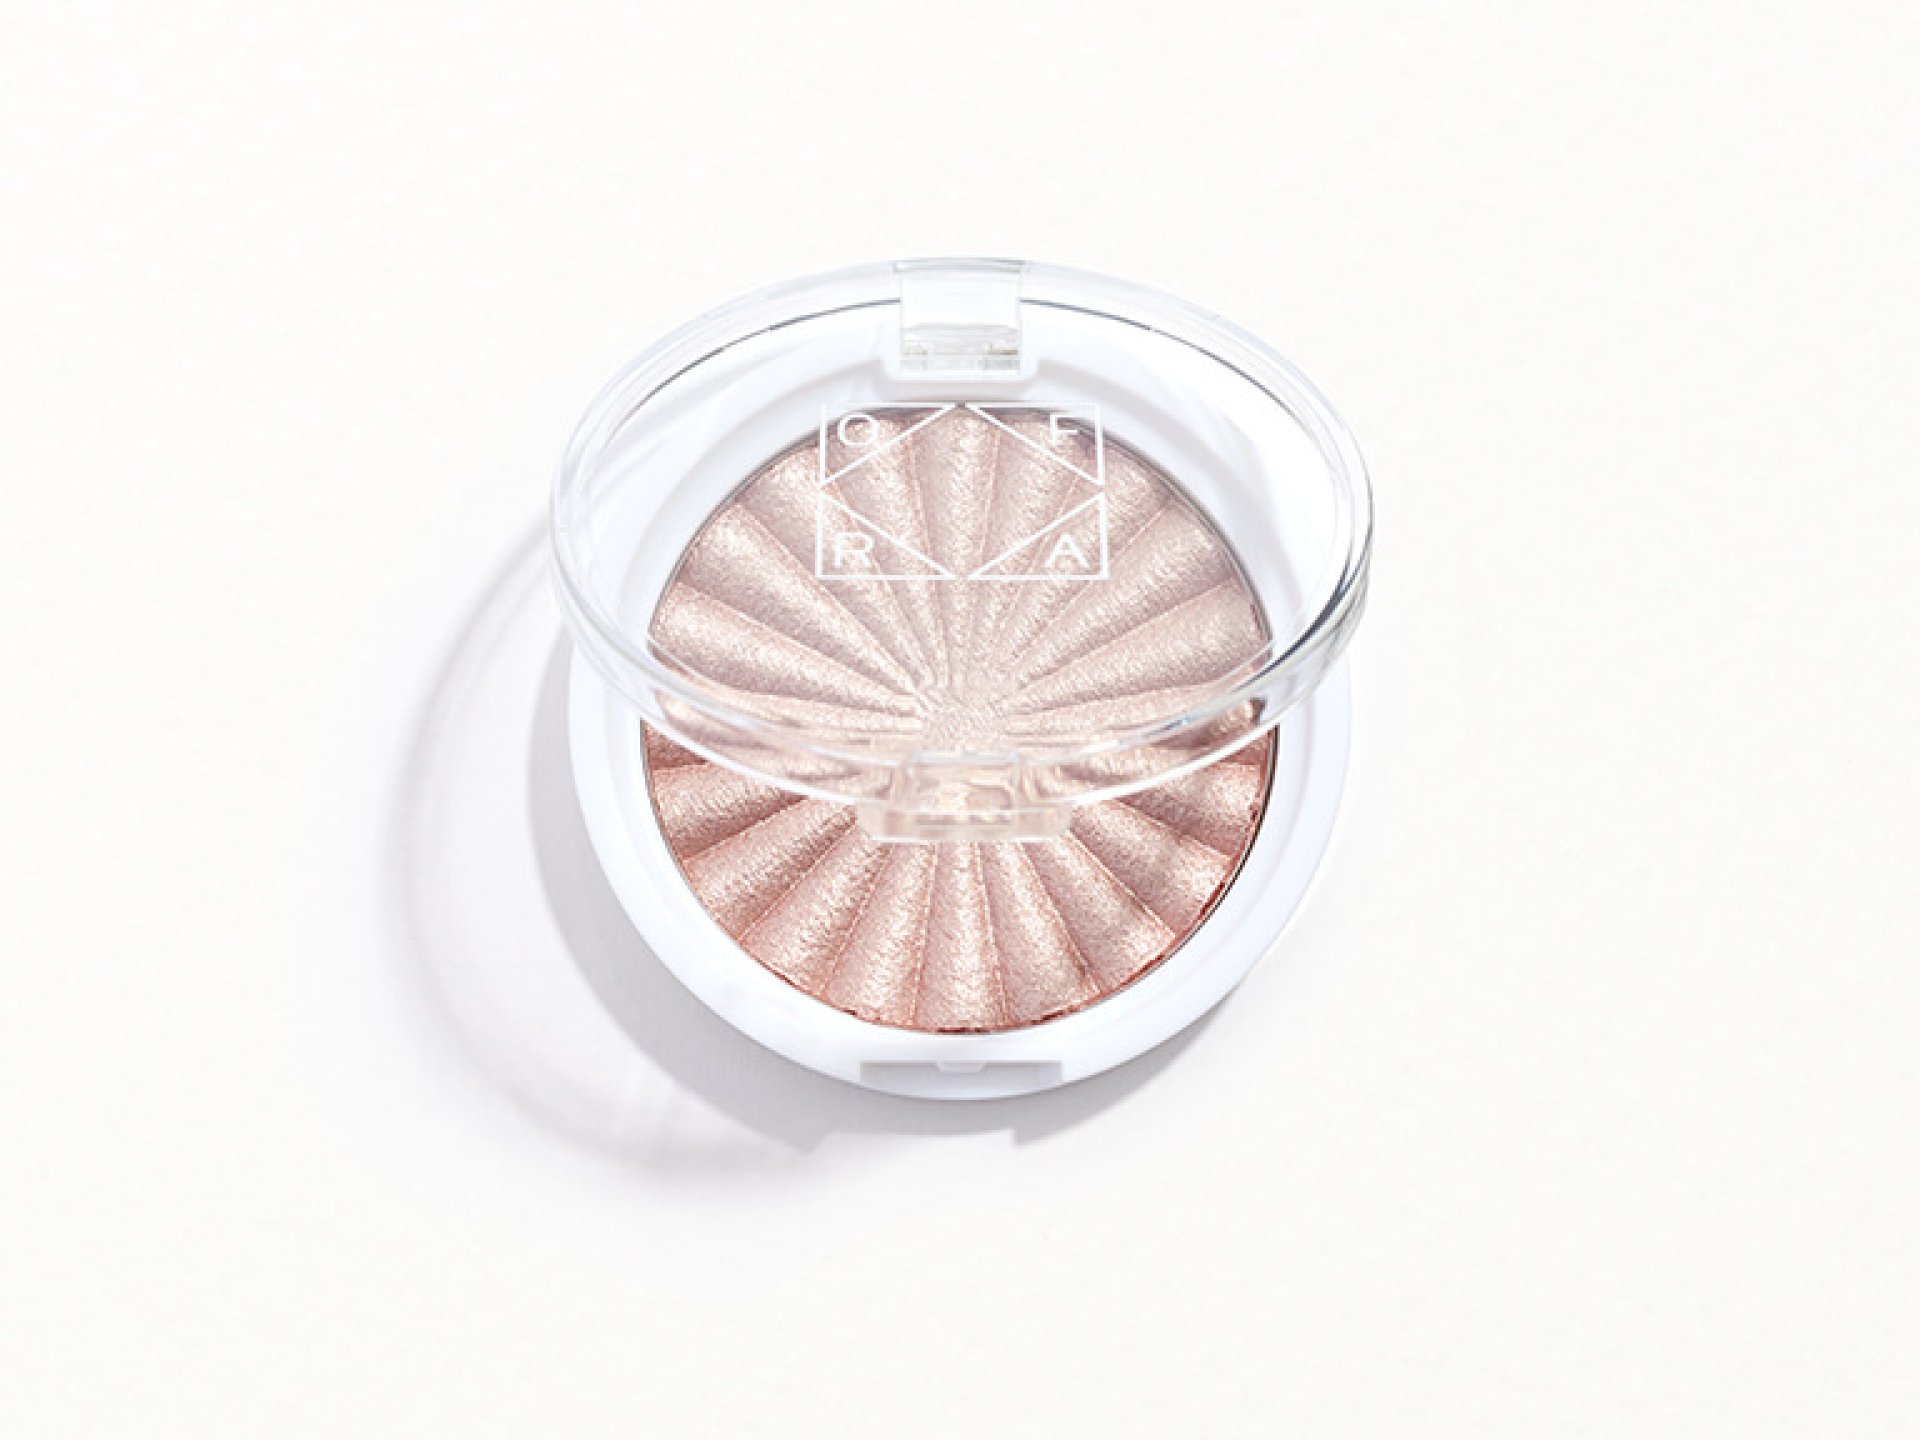 OFRA COSMETICS Highlighter in Blissful